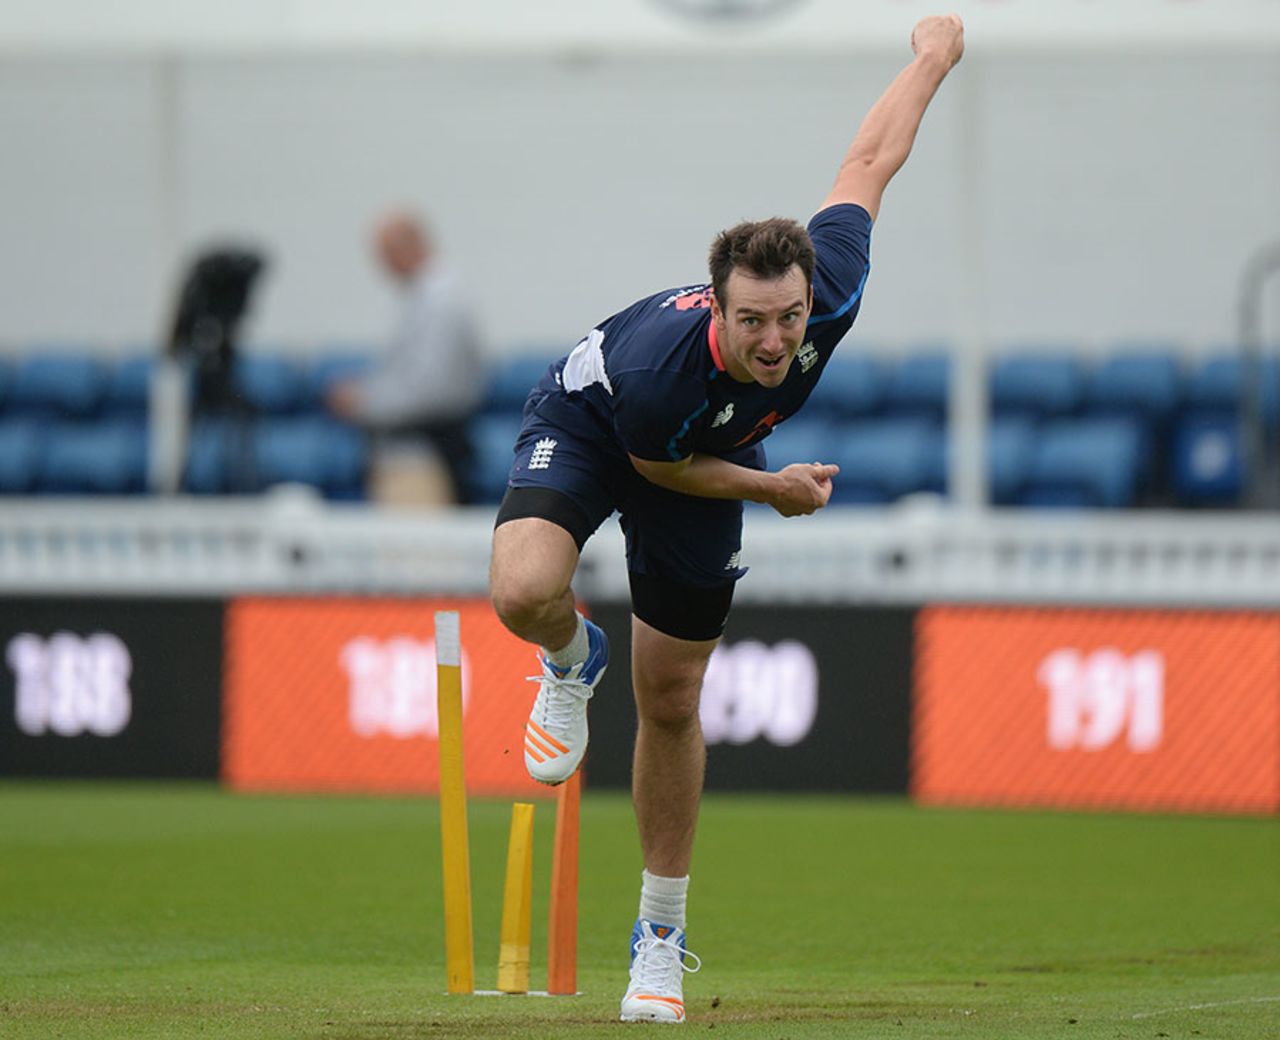 Toby Roland-Jones will make his Test debut at The Oval, England v South Africa, 3rd Investec Test, The Oval, July 26, 2017